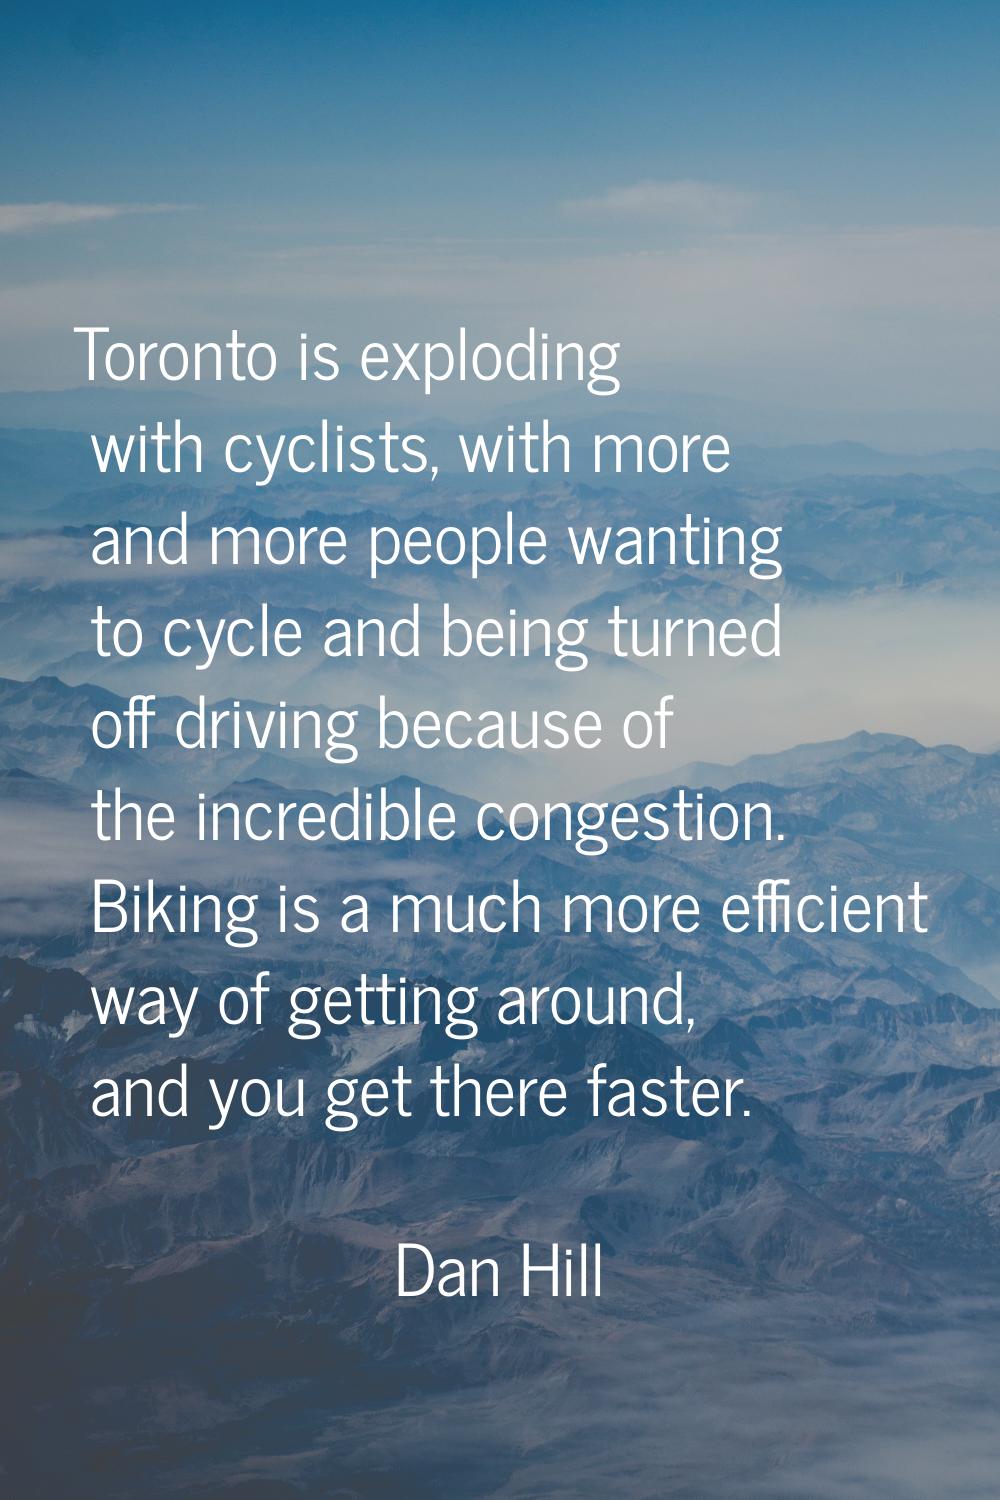 Toronto is exploding with cyclists, with more and more people wanting to cycle and being turned off